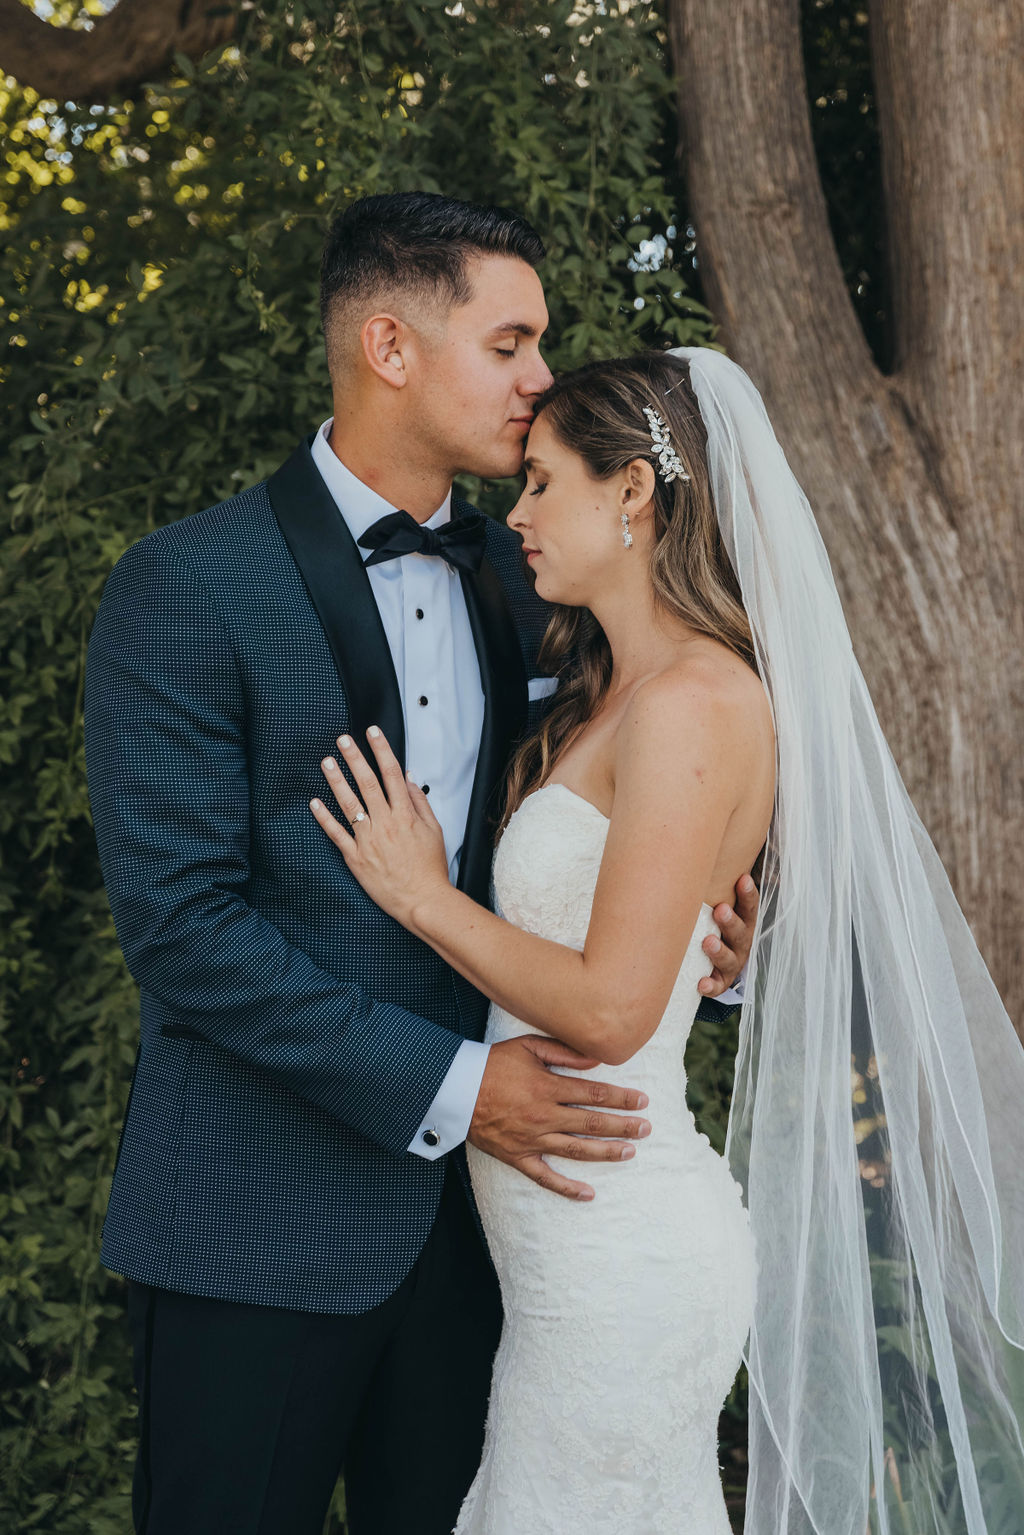 A bride in a white gown and a groom in a black tuxedo embrace, smiling, in a garden setting at their Park winters wedding